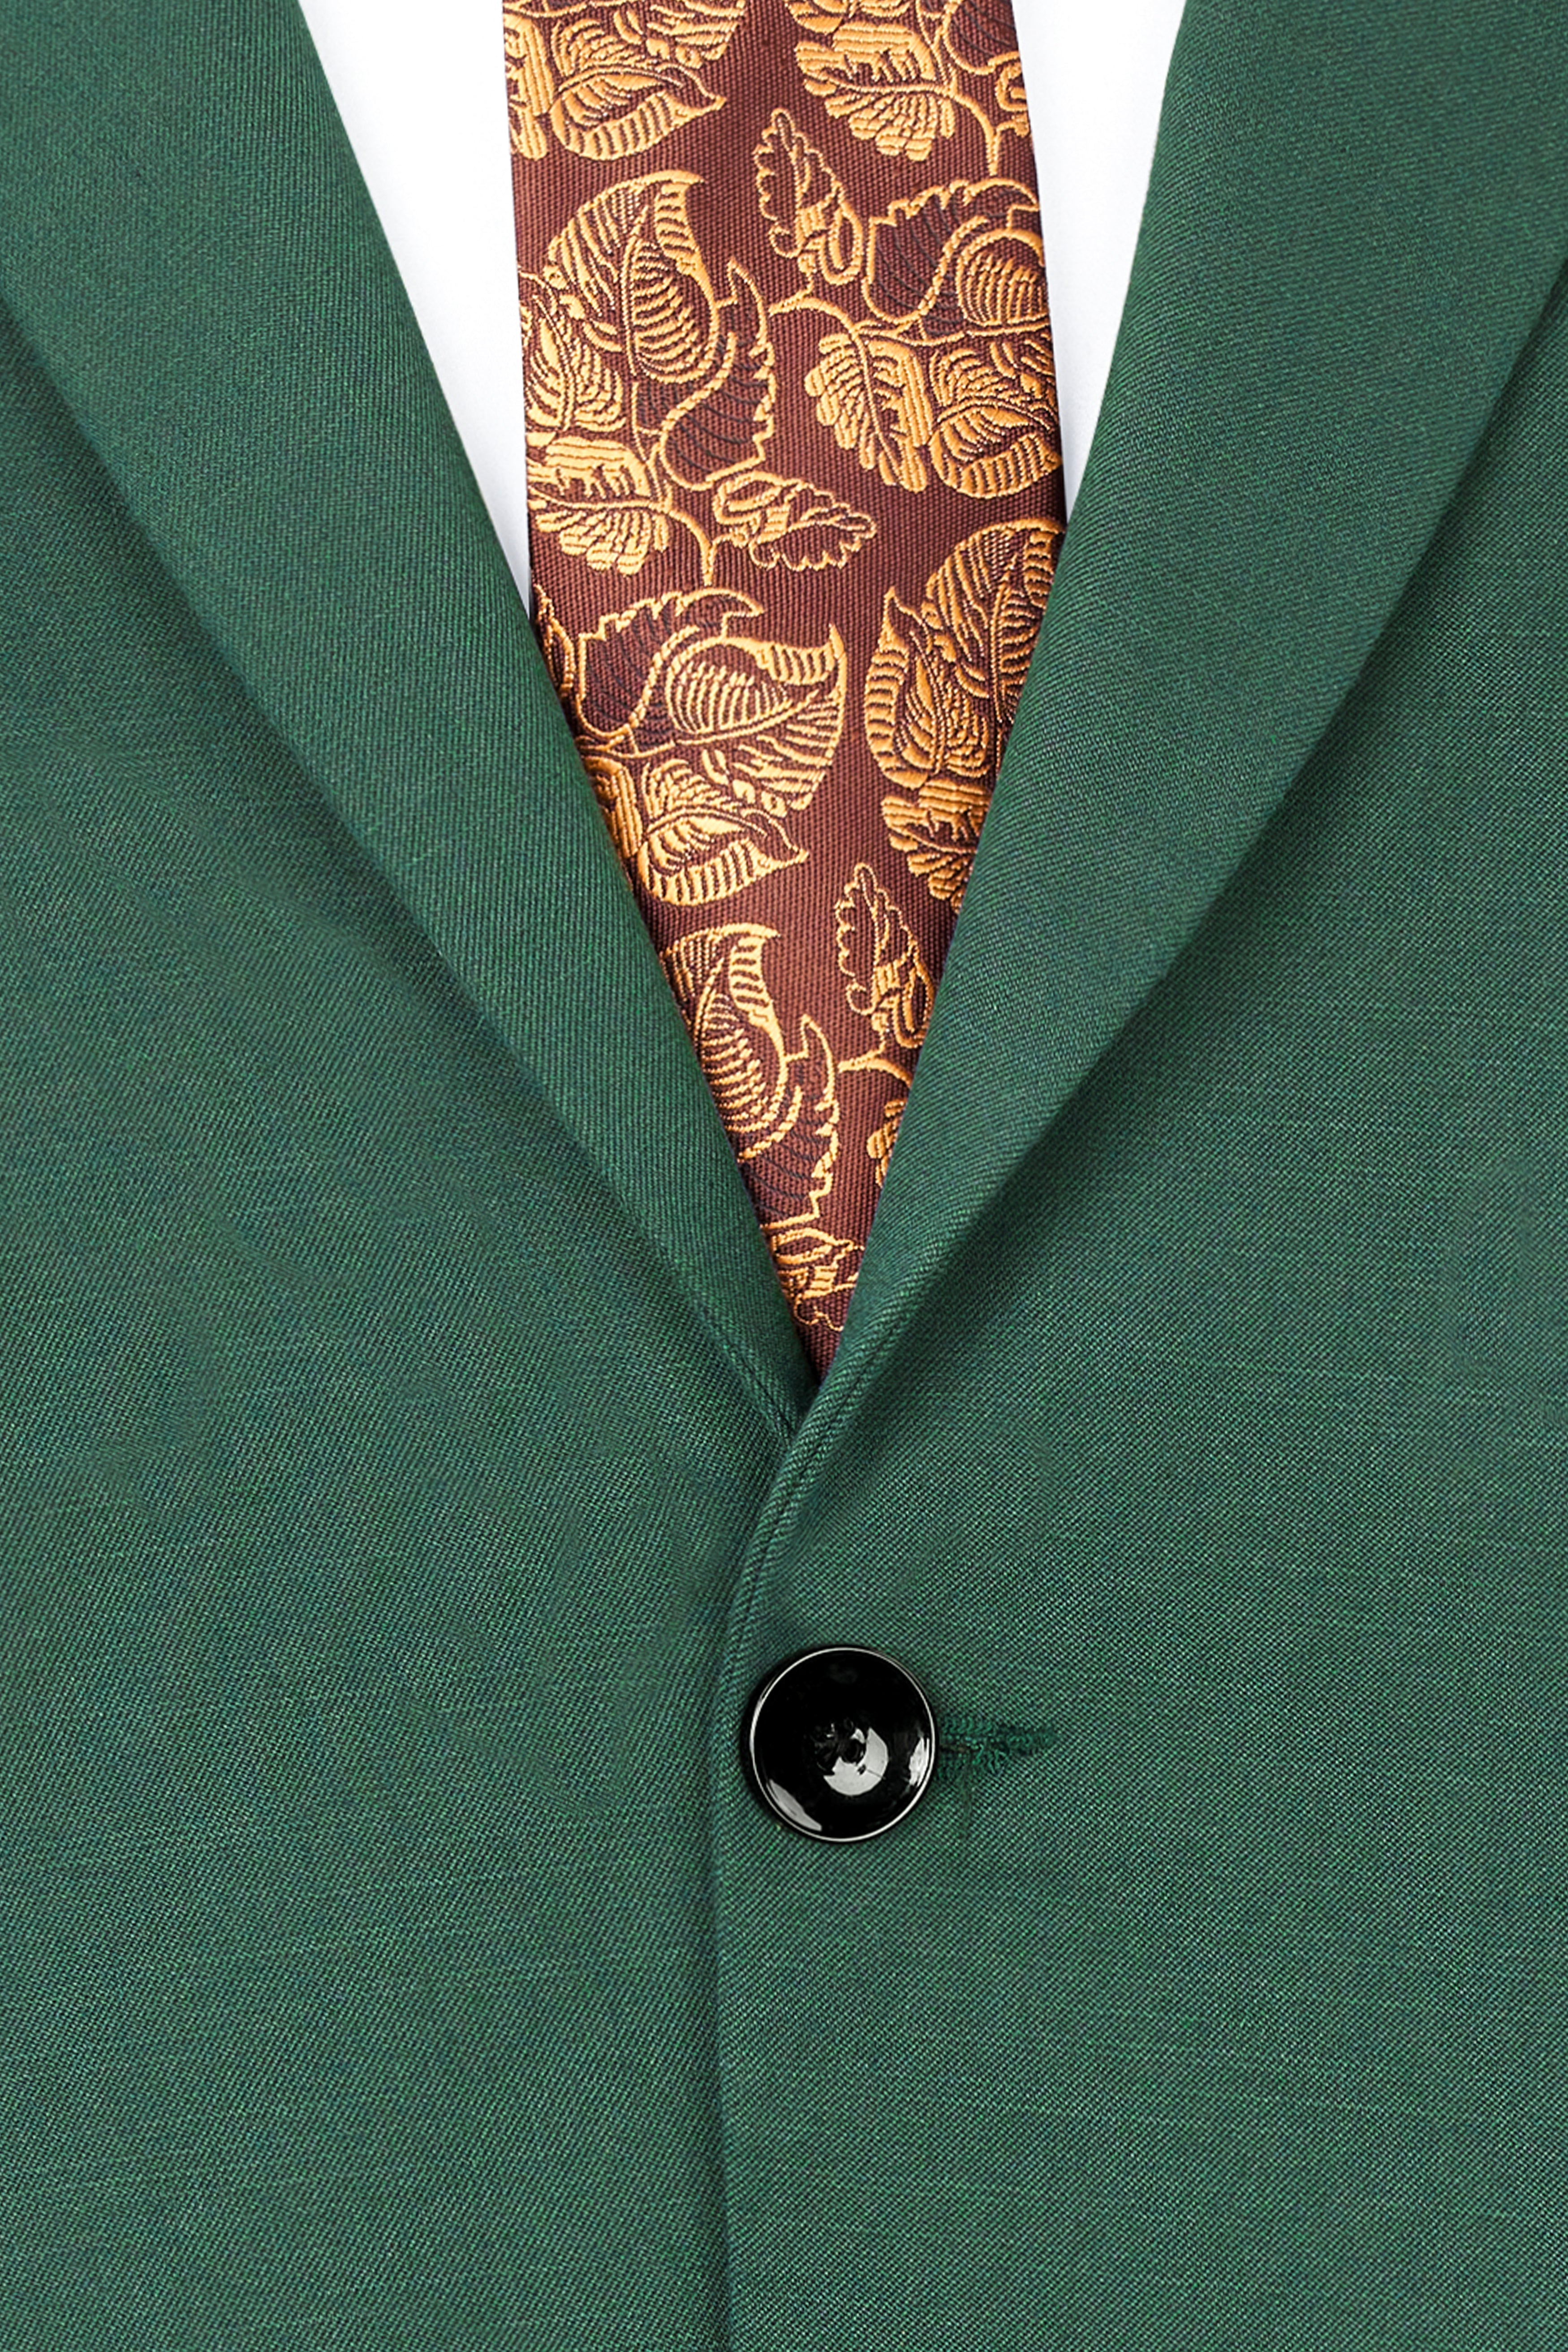 Everglade Green Wool Rich Single Breasted Stretchable traveler Blazer BL2710-SB-36, BL2710-SB-38, BL2710-SB-40, BL2710-SB-42, BL2710-SB-44, BL2710-SB-46, BL2710-SB-48, BL2710-SB-50, BL2710-SB-52, BL2710-SB-54, BL2710-SB-56, BL2710-SB-58, BL2710-SB-60